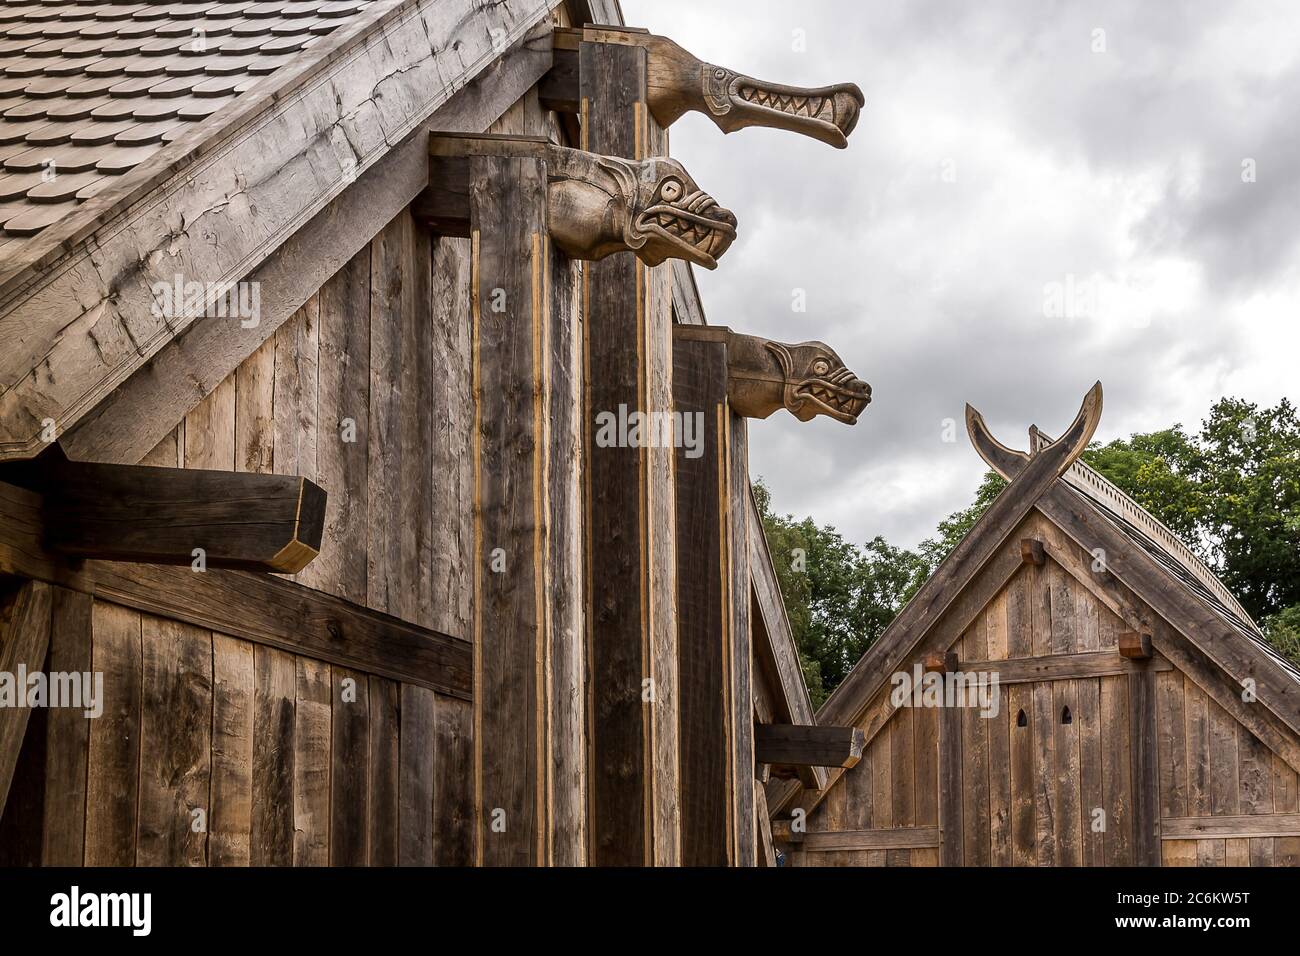 Dragonheads at the King's Hall, a reconstructed viking longhouse in Lejre, Denmark, July 9, 2020 Stock Photo